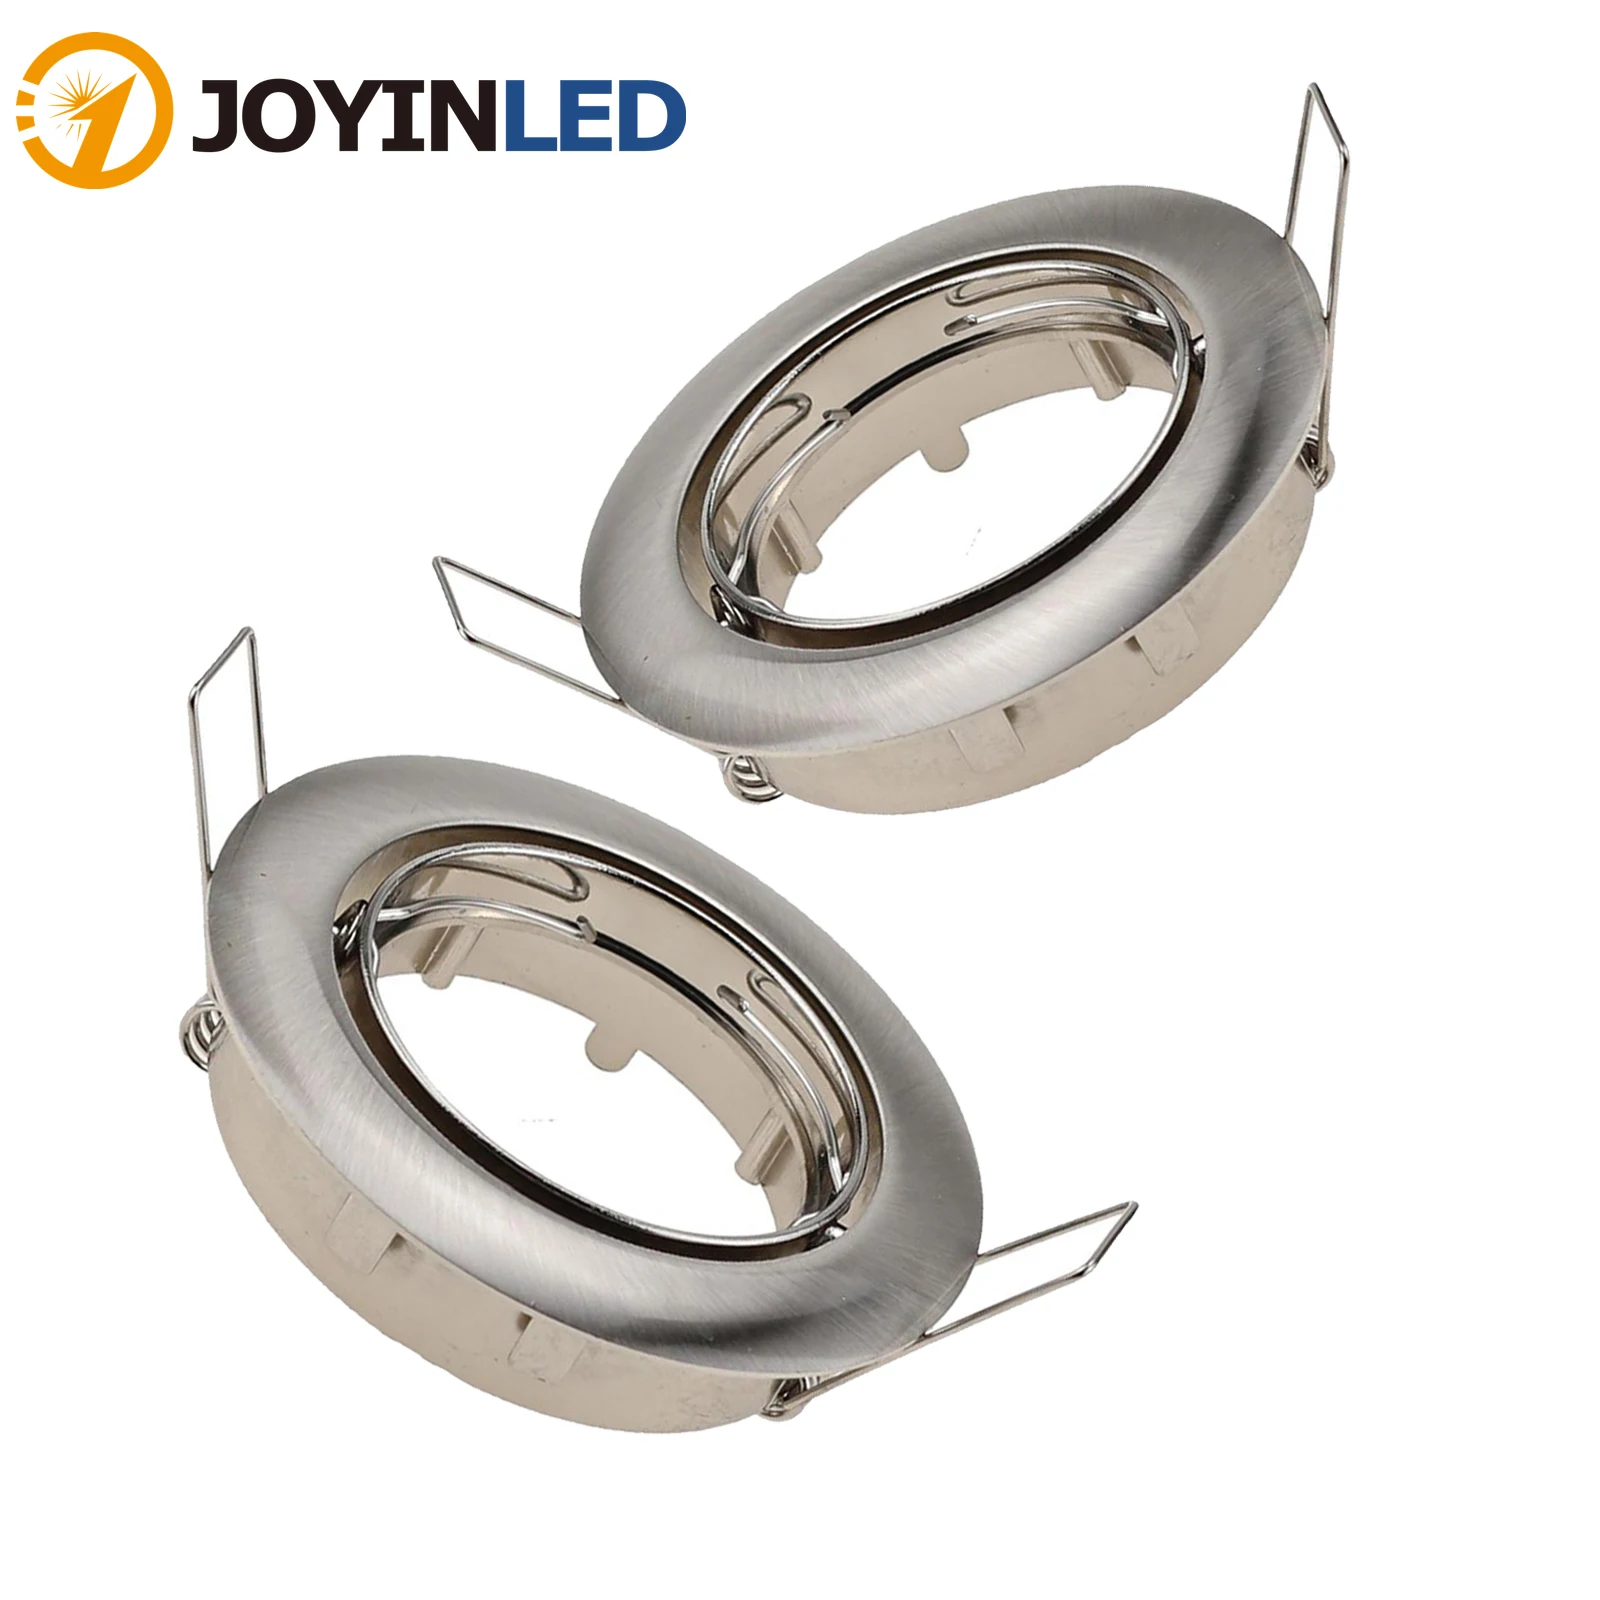 

4pcs Spotlight Frame Round LED Downlight Mounting Frame GU10/MR16 Recessed Ceiling Fixtures Fittings